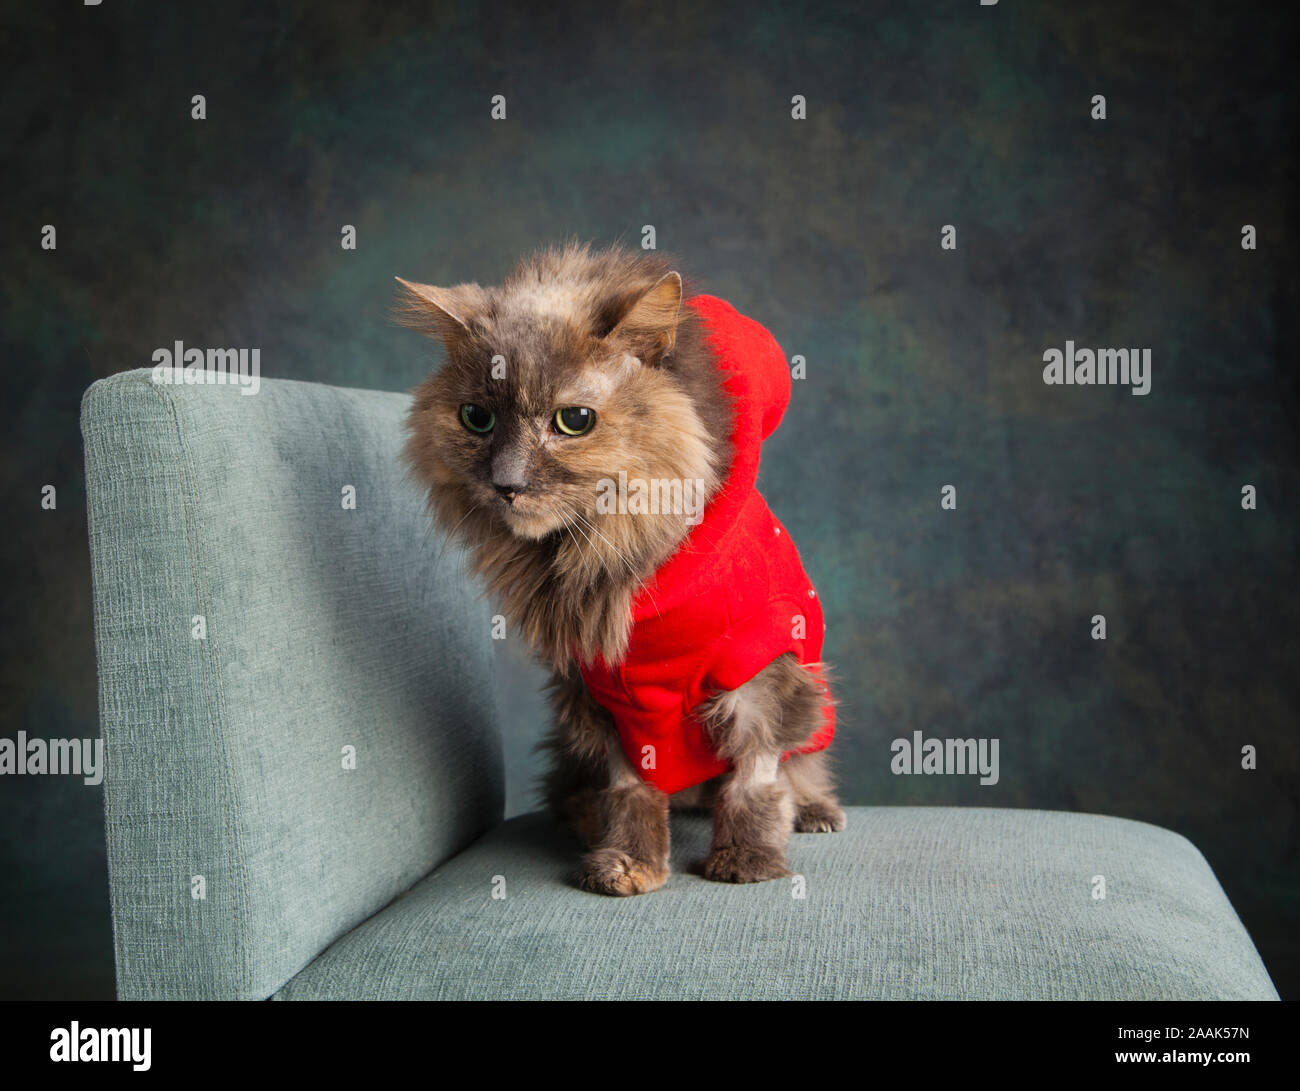 Studio shot of Long haired cat wearing red vest sitting on chair Banque D'Images